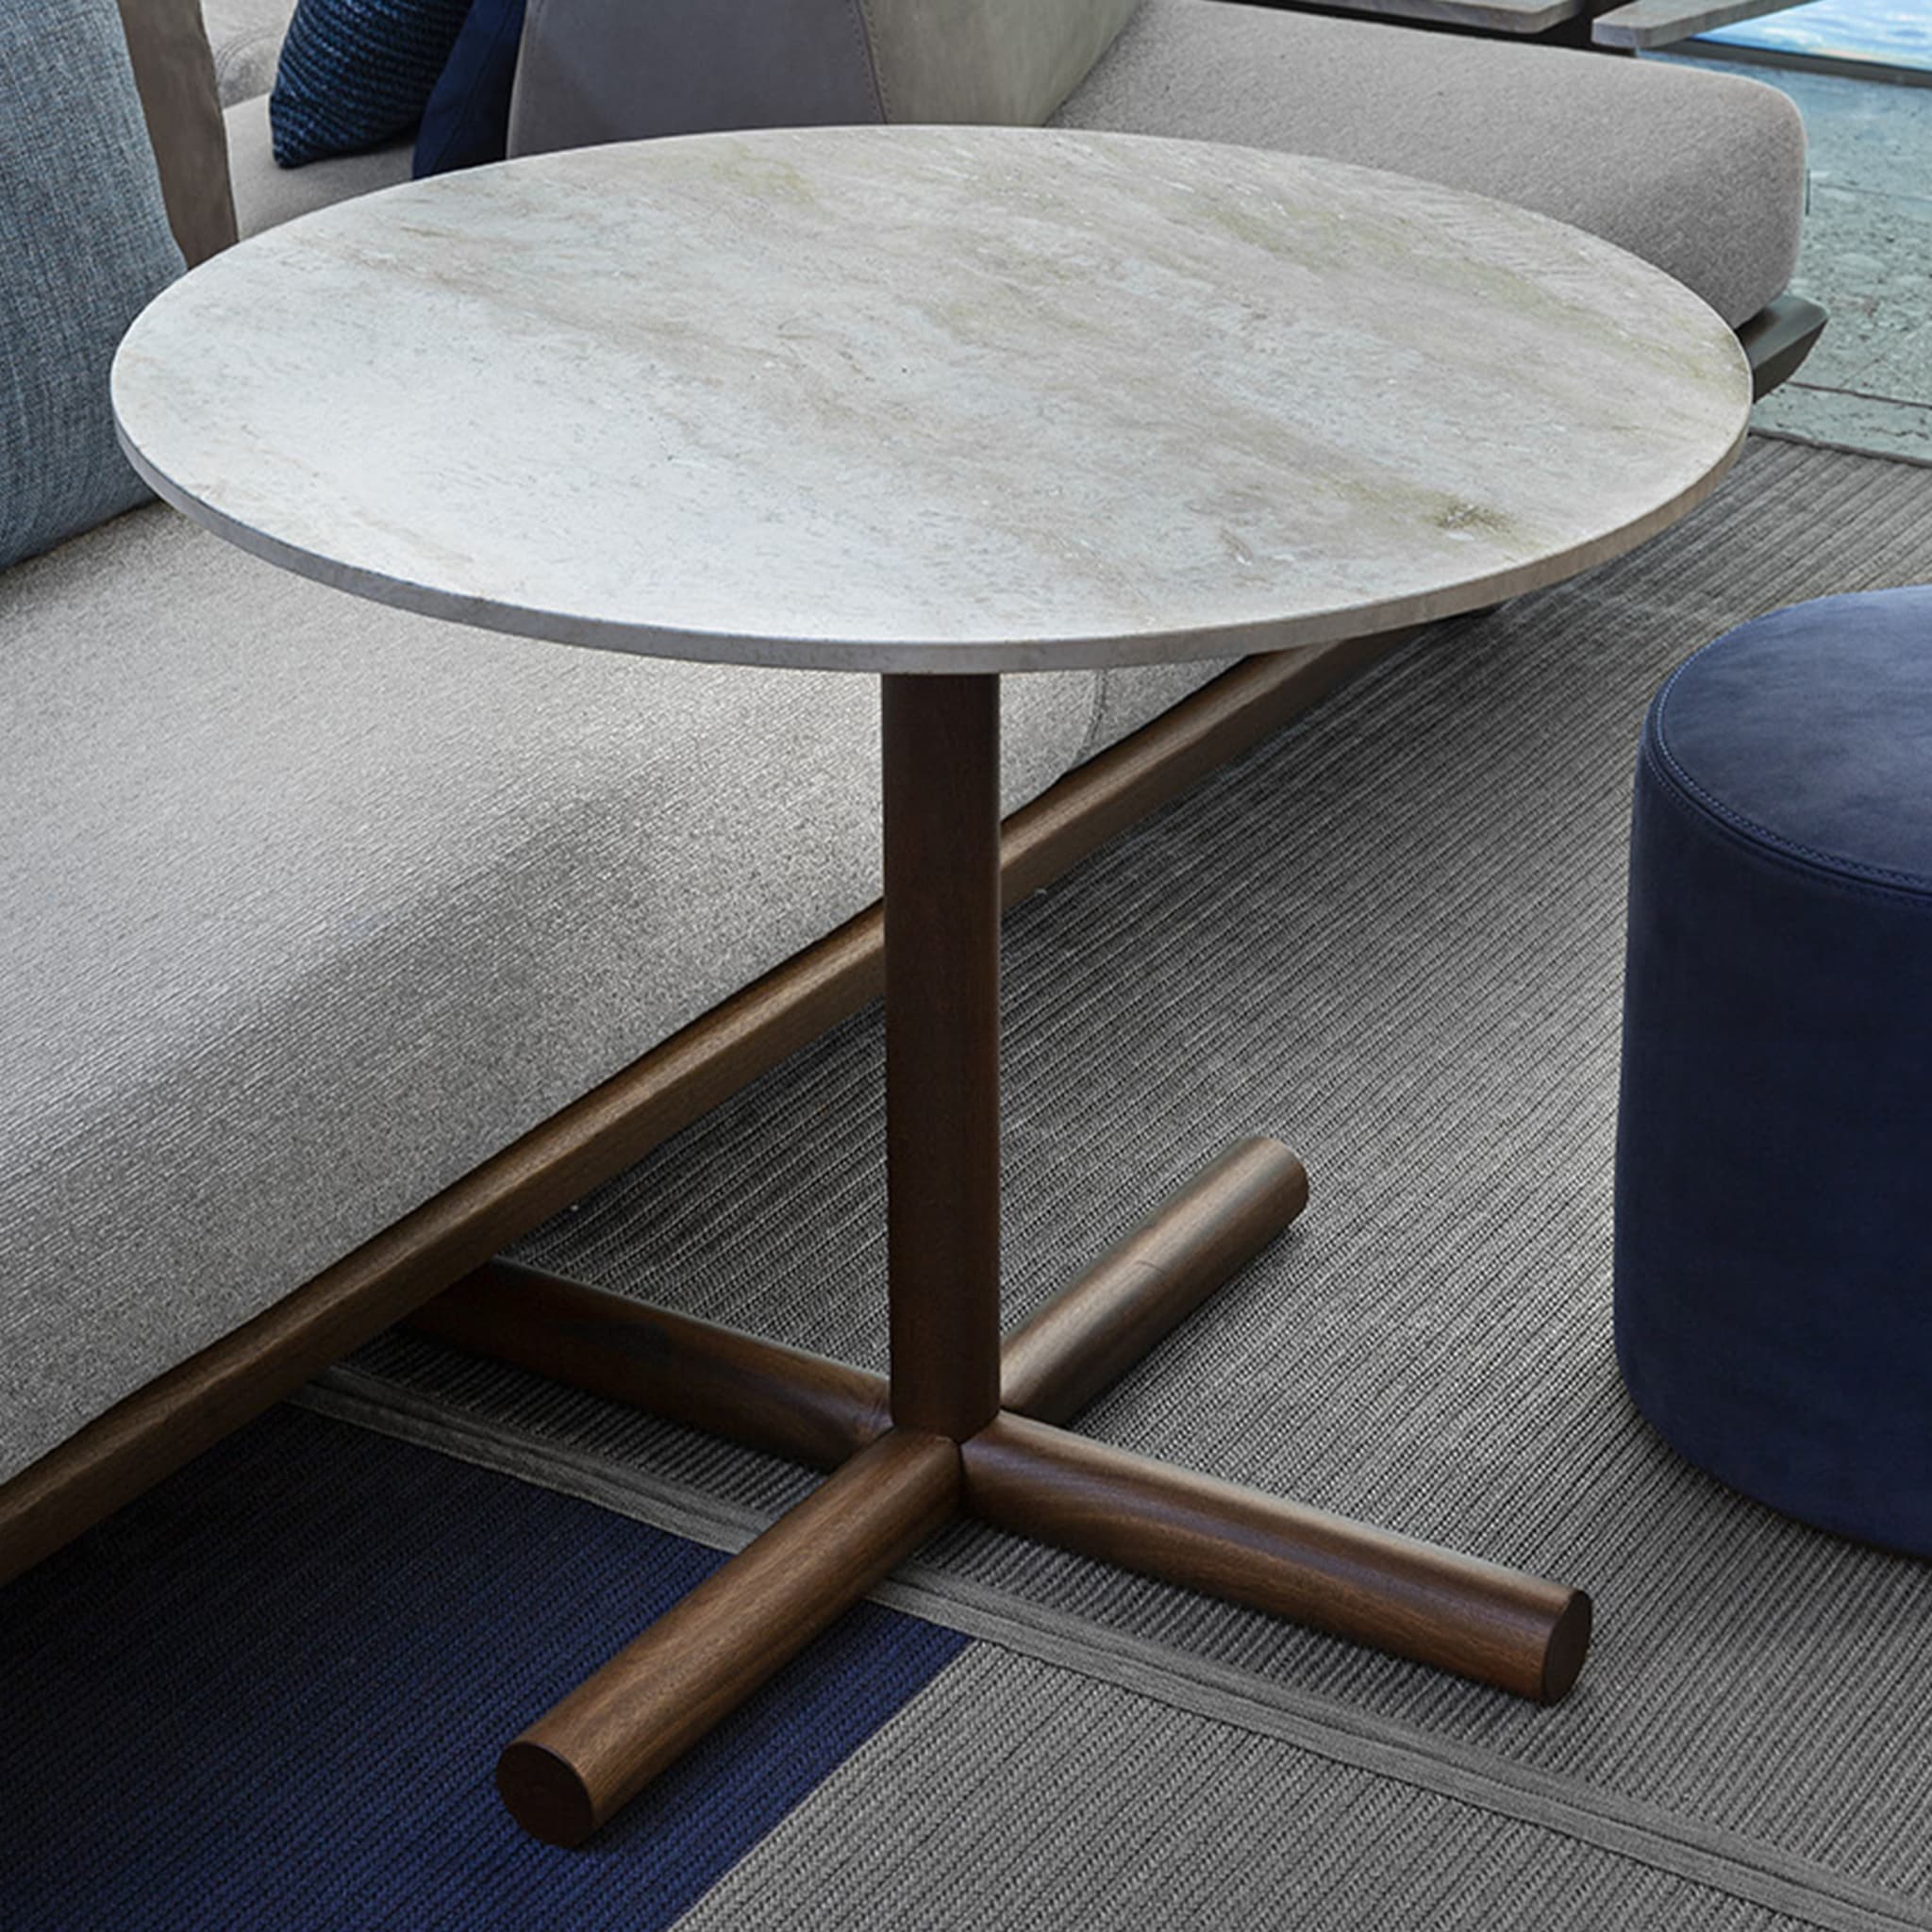 Helix 40 Coffee Table by Massimo Castagna - Alternative view 1